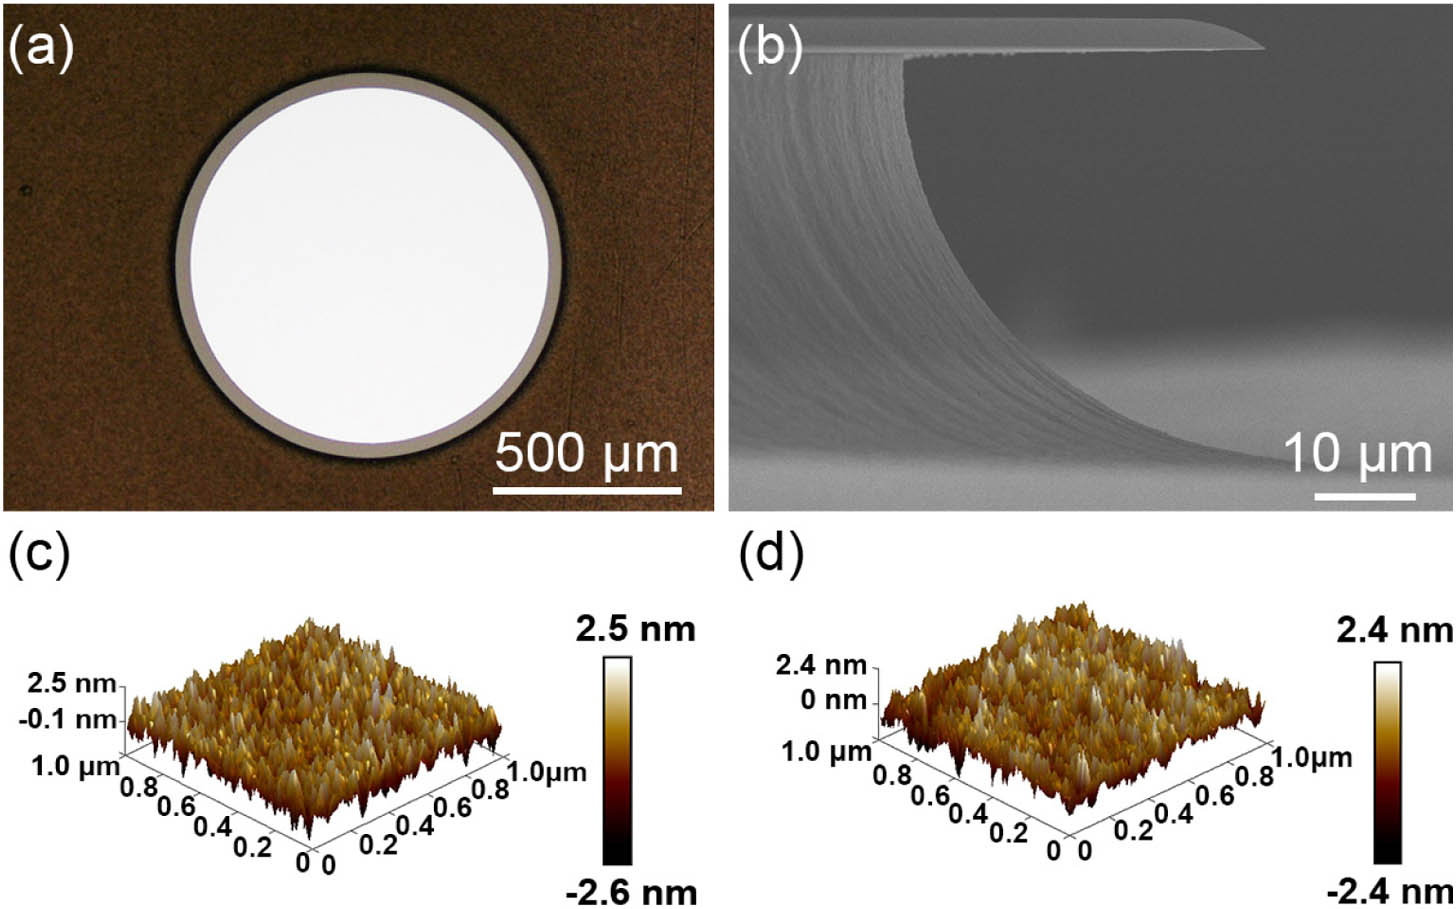 Typical images and atomic force microscope measurement of the ultrahigh-Q wedged silica microdisk (diameter: 1 mm, thickness: 4 μm). (a) Optical micrograph showing the top view of the microdisk. (b) Side-view scanning electron microcopy image of the wedged silica microdisk. (c) 3D AFM scan of the top surface with RMS roughness of 0.72 nm and correlation length of 30 nm. (d) 3D AFM scan of the sidewall with RMS roughness of 0.67 nm and correlation length of 20 nm.